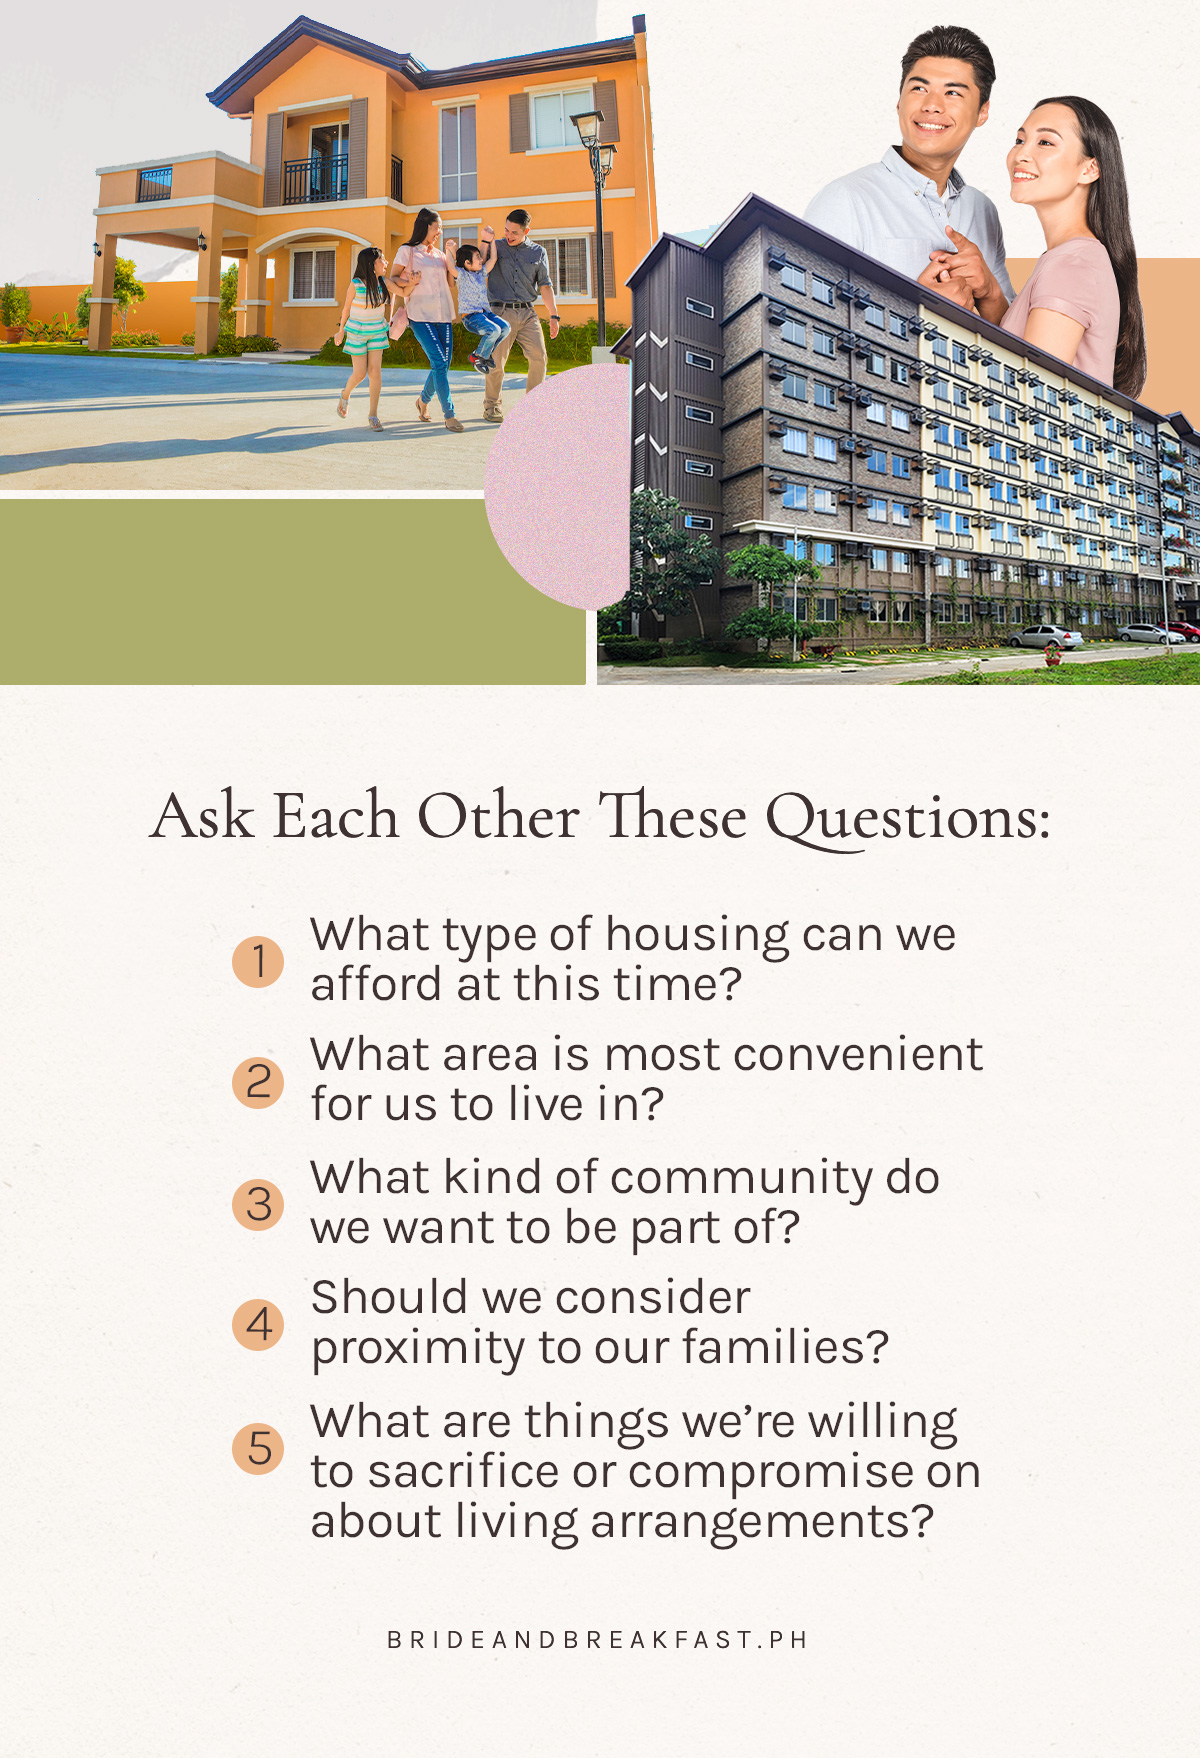 Ask each other these questions: What type of housing can we afford at this time? What area is most convenient for us to live in? What kind of community do we want to be part of? Should we consider proximity to our families? What are things we’re willing to sacrifice or compromise on about living arrangements?